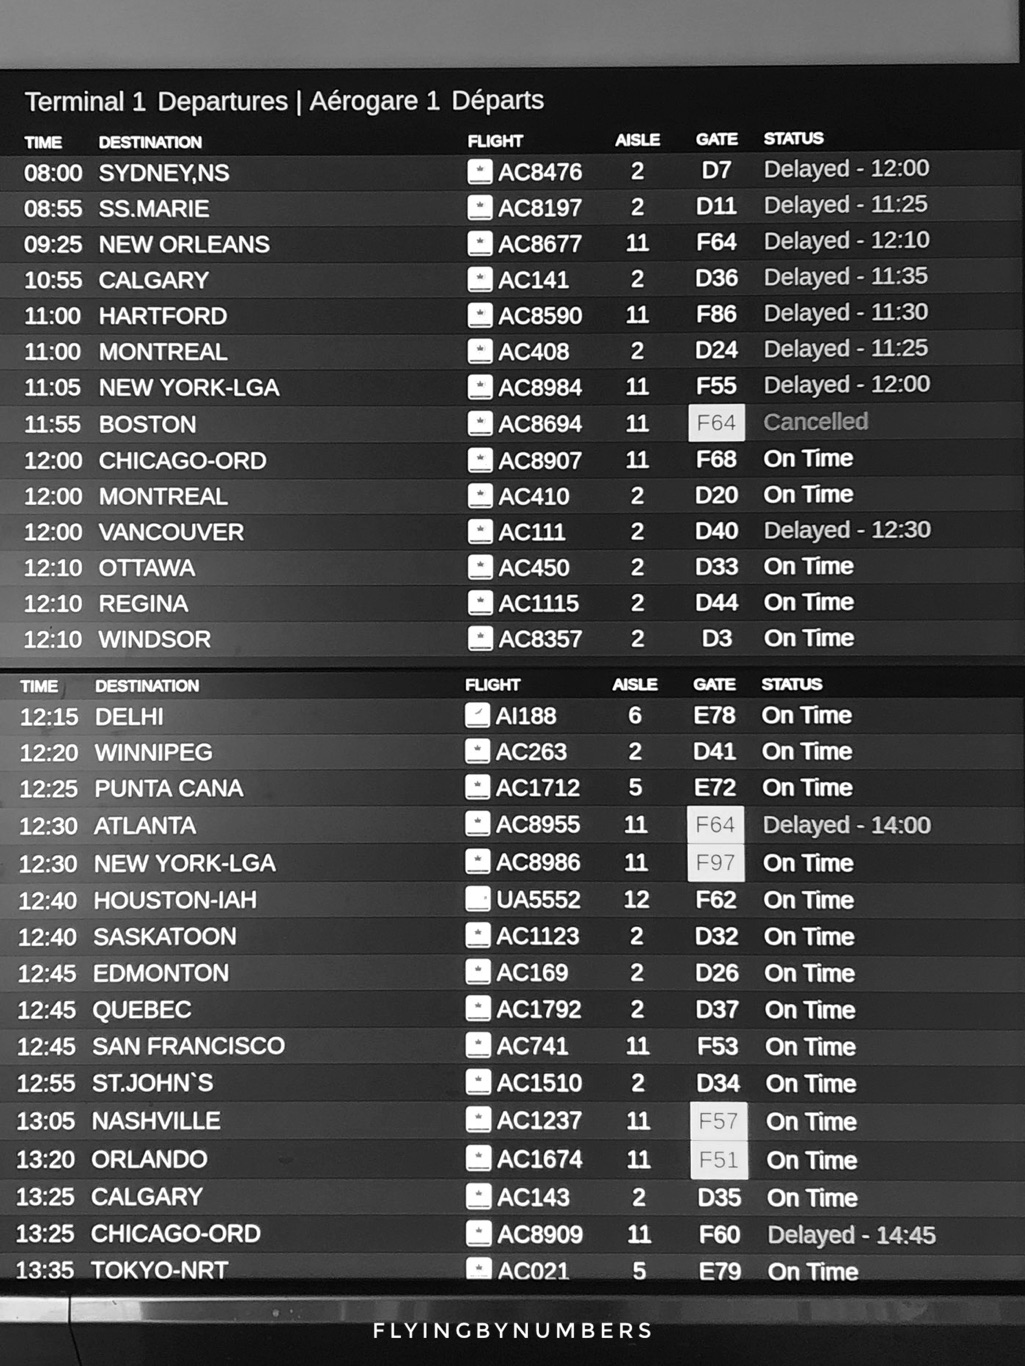 Departures screen showing delayed and cancelled flights